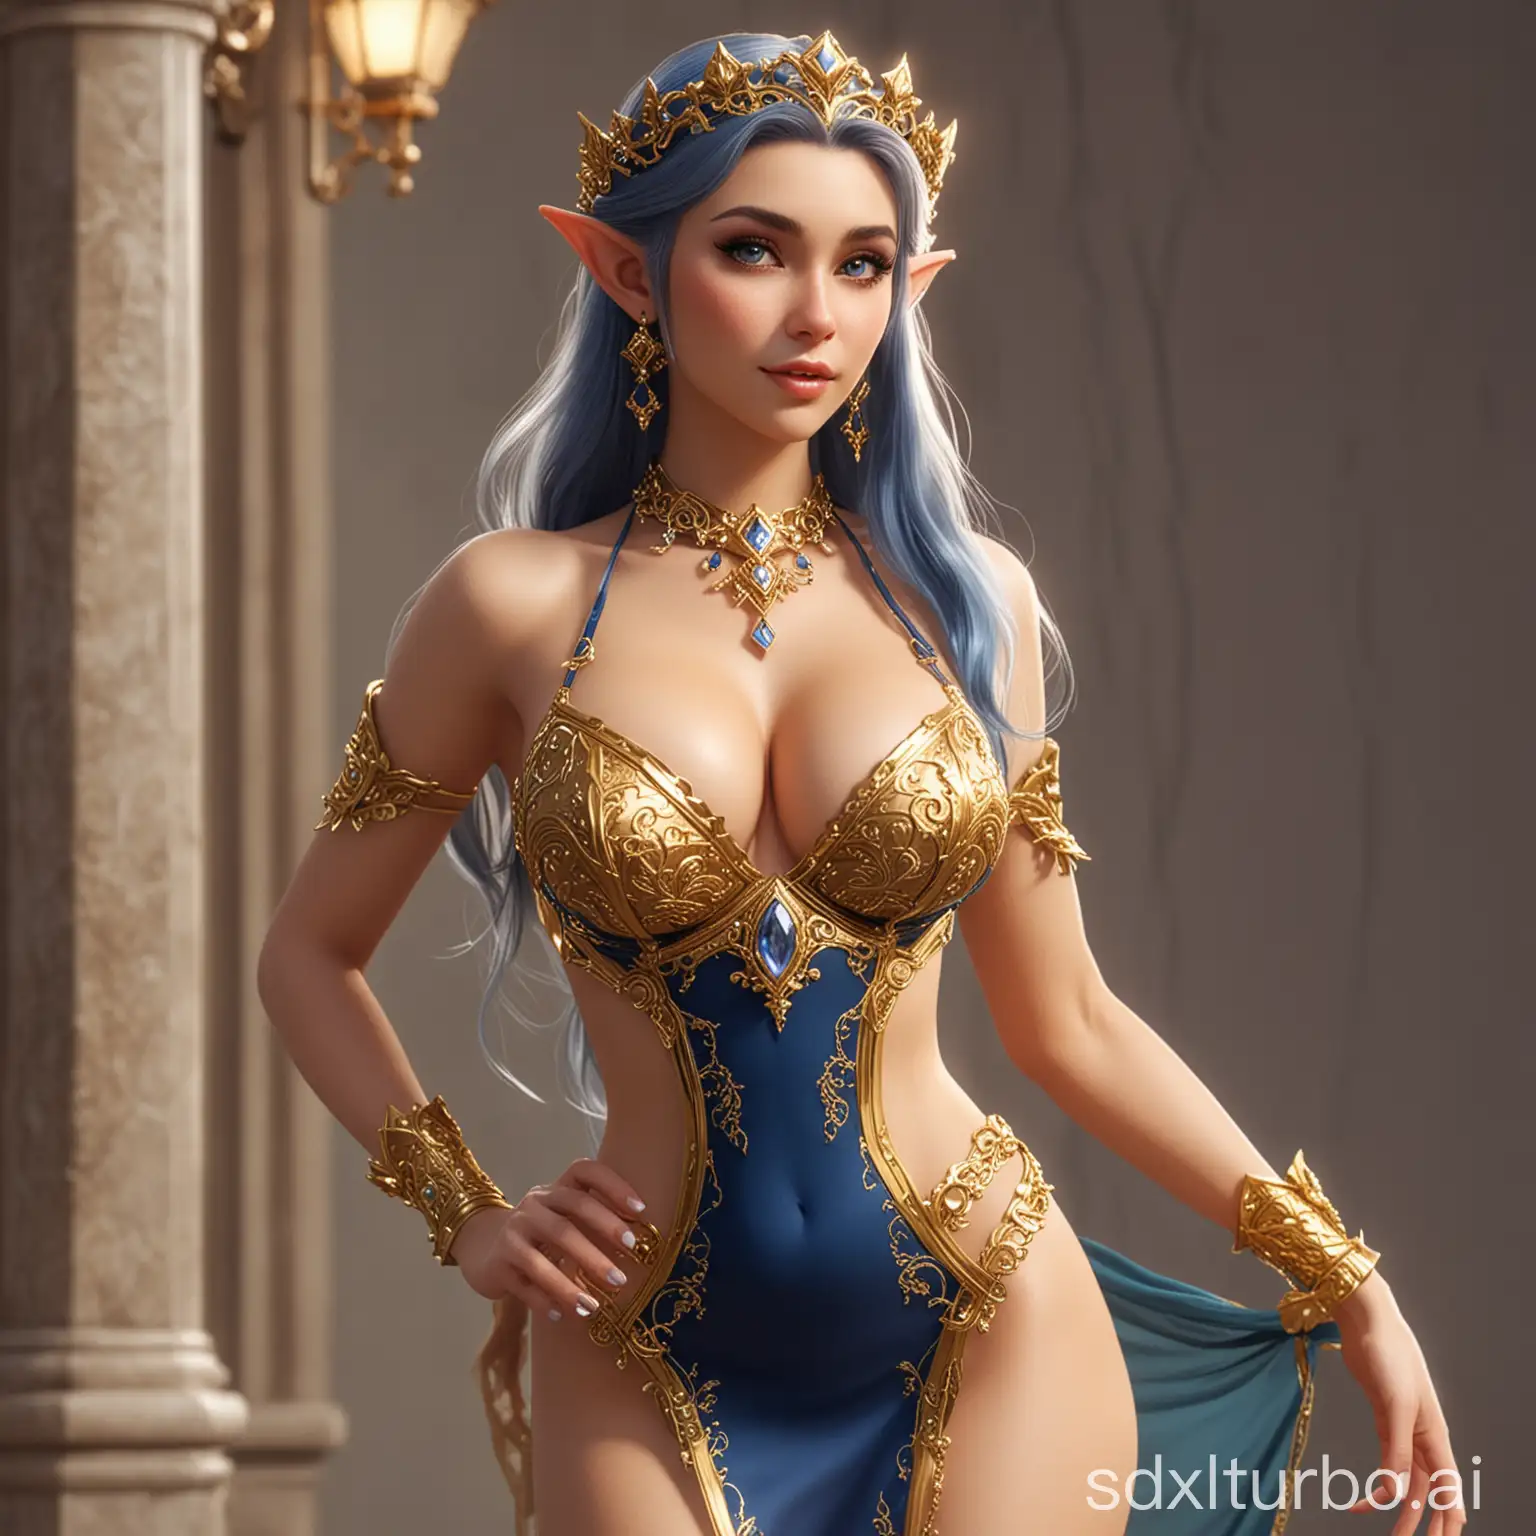 Busty-Elf-Princess-in-Gold-Jewelry-Lingerie-Sapphire-Voxel-Dress